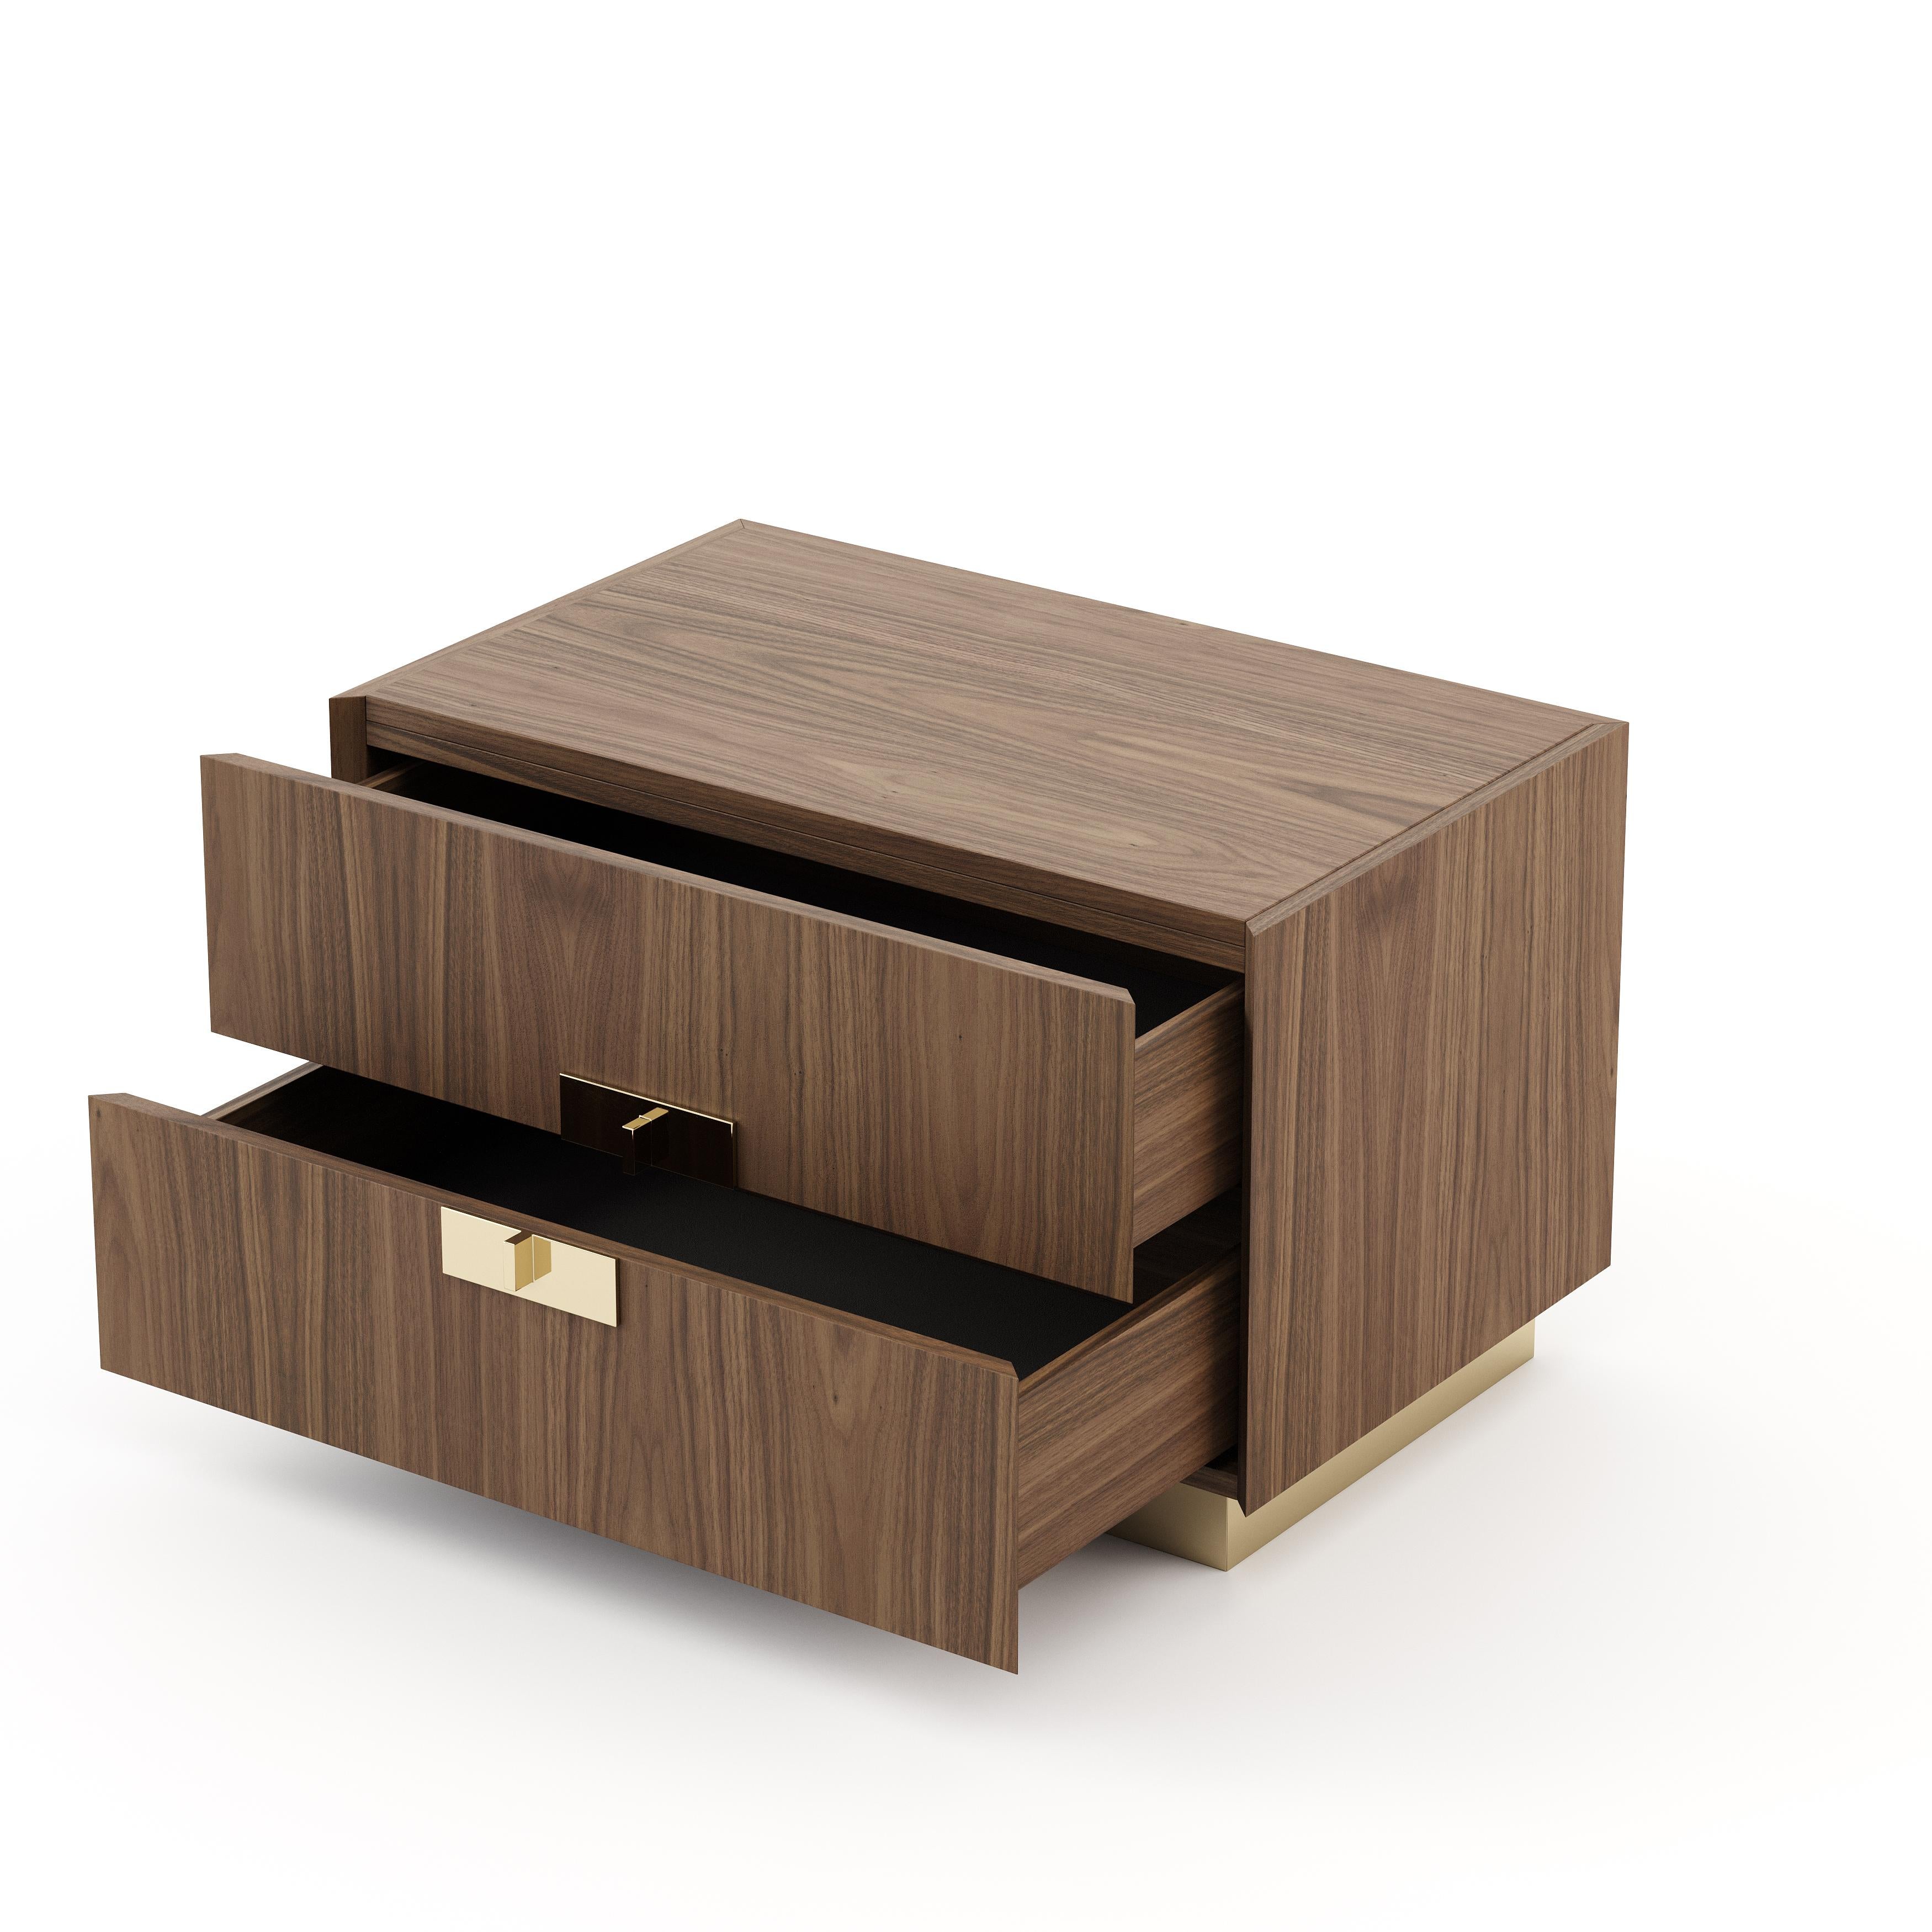 Lady bedside table has been designed for classic bedrooms. This timeless nightstand in smooth wood features two soft-closing drawers positioned on a contrasting metal base, with each drawer having its own metal handle. 

* Available in different